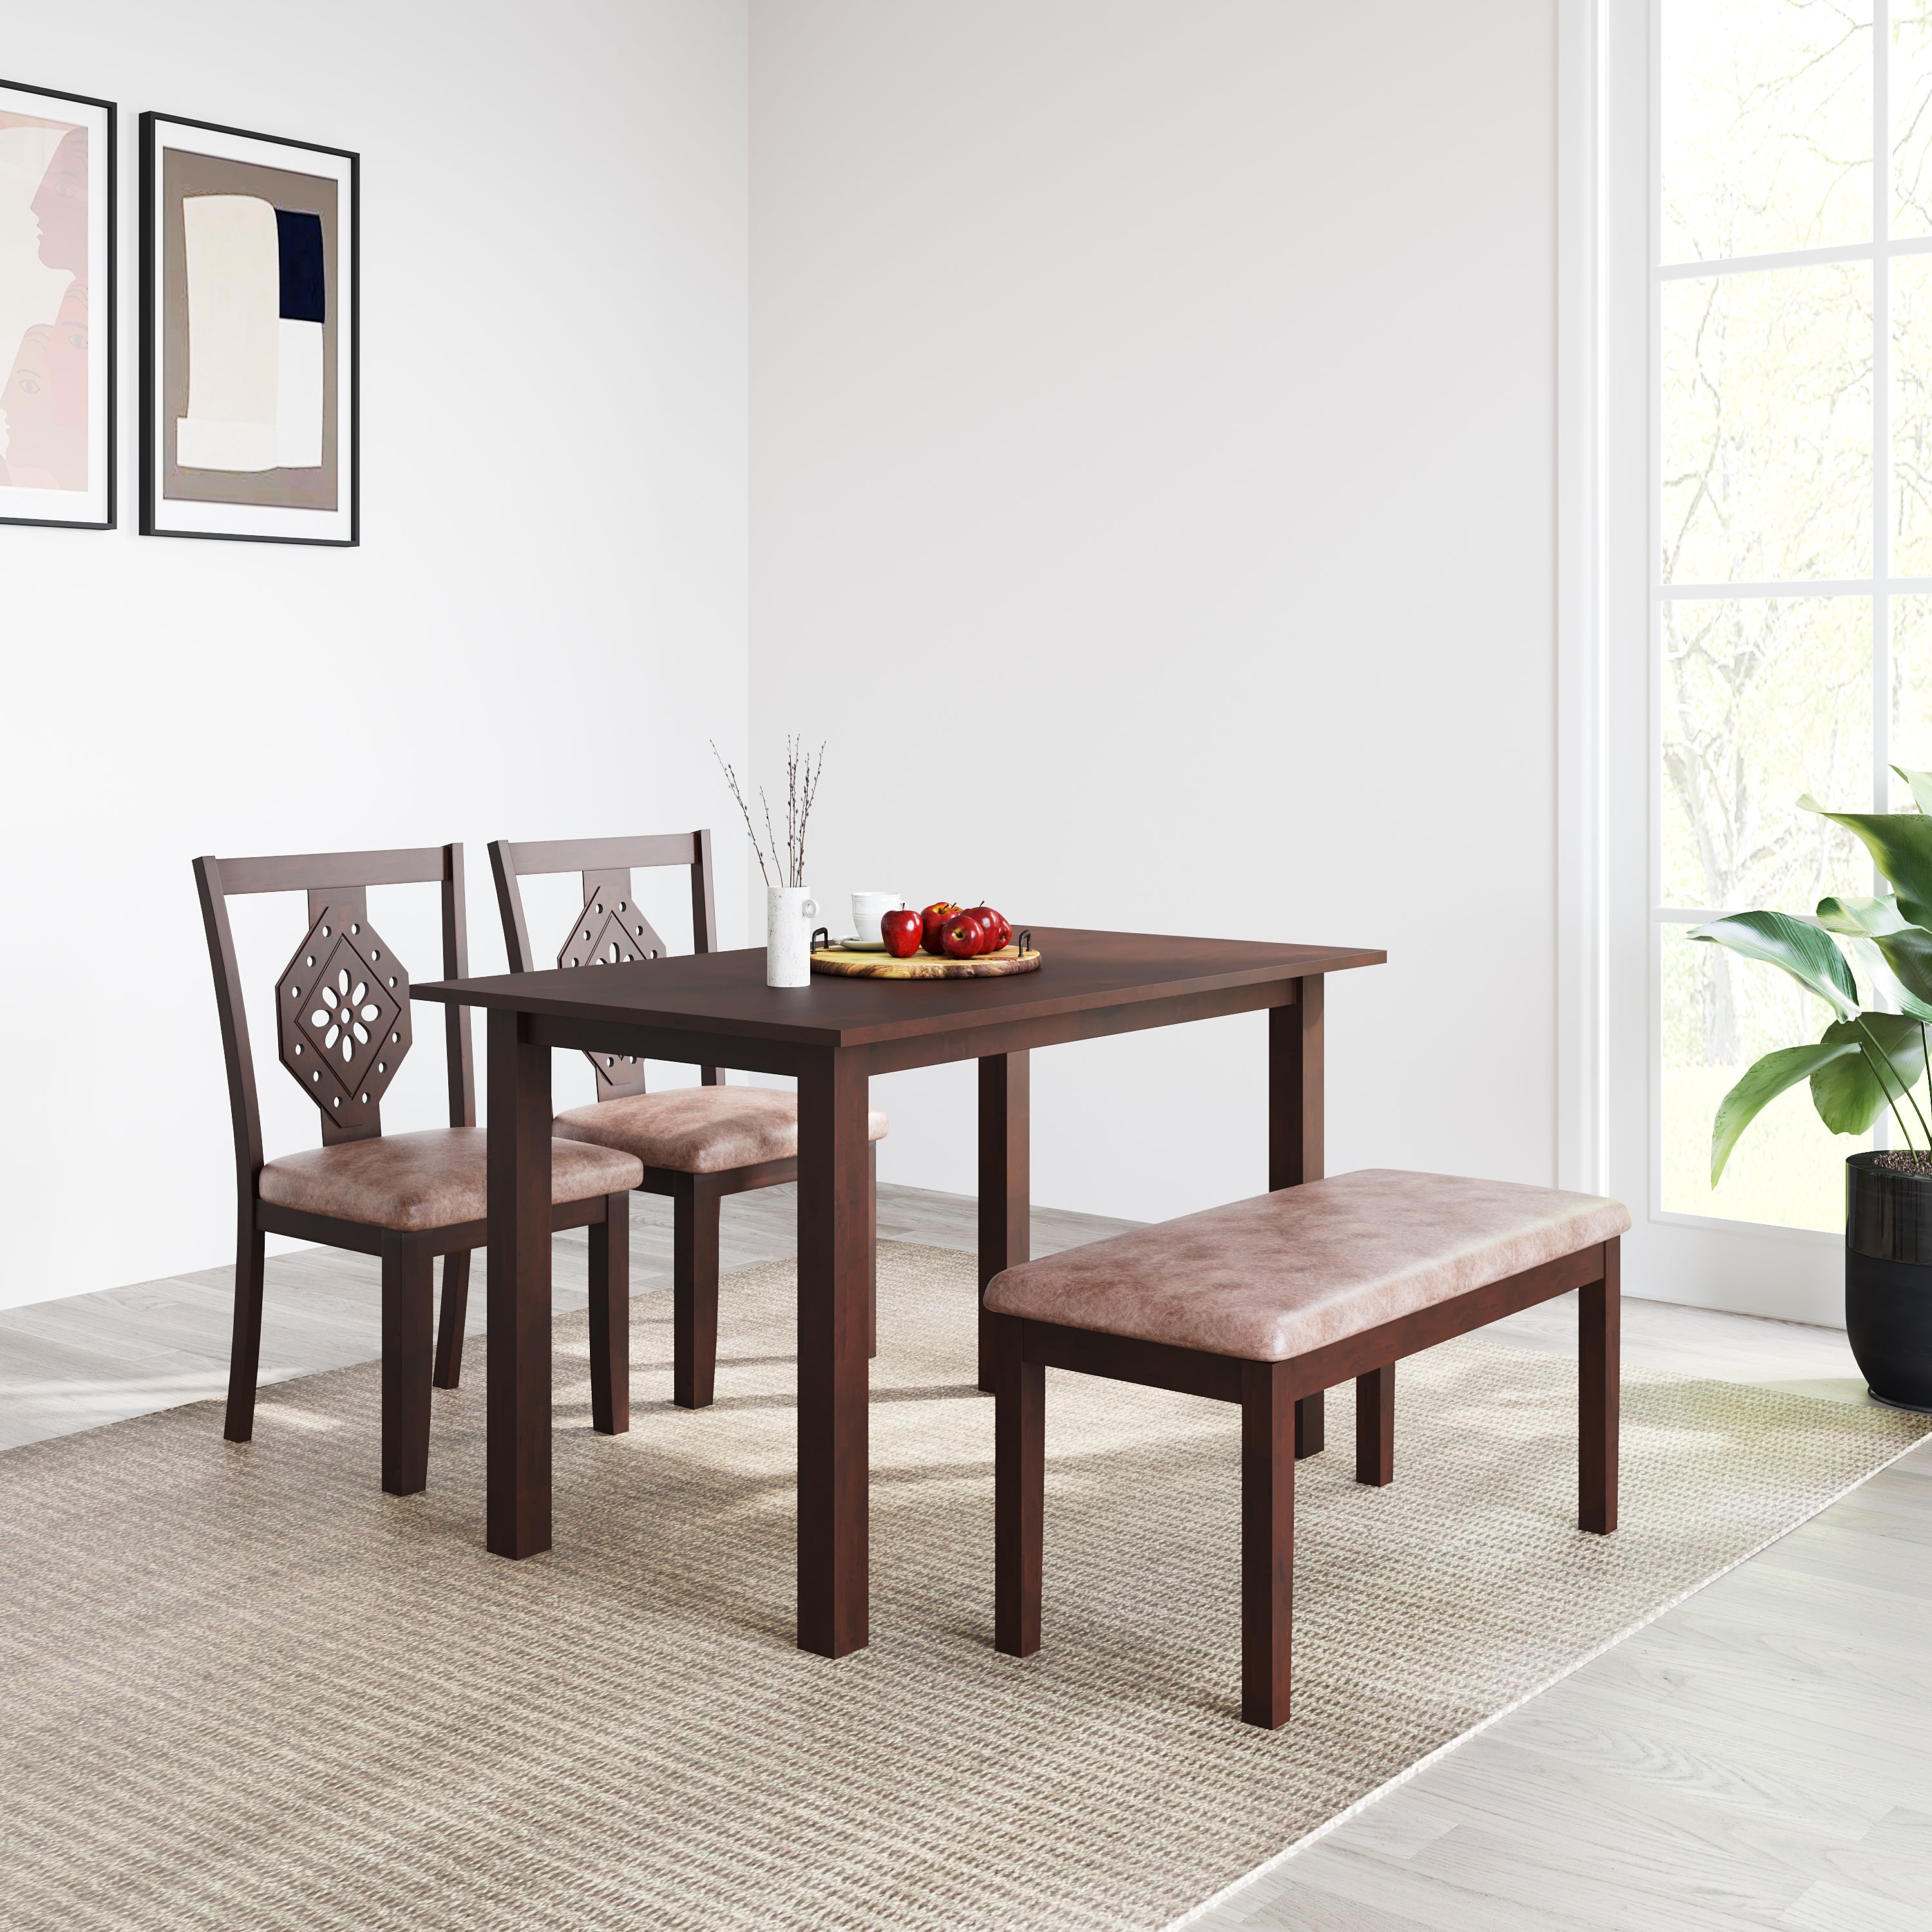 Precious 4 Seater Dining Set With Bench (Antique Oak)